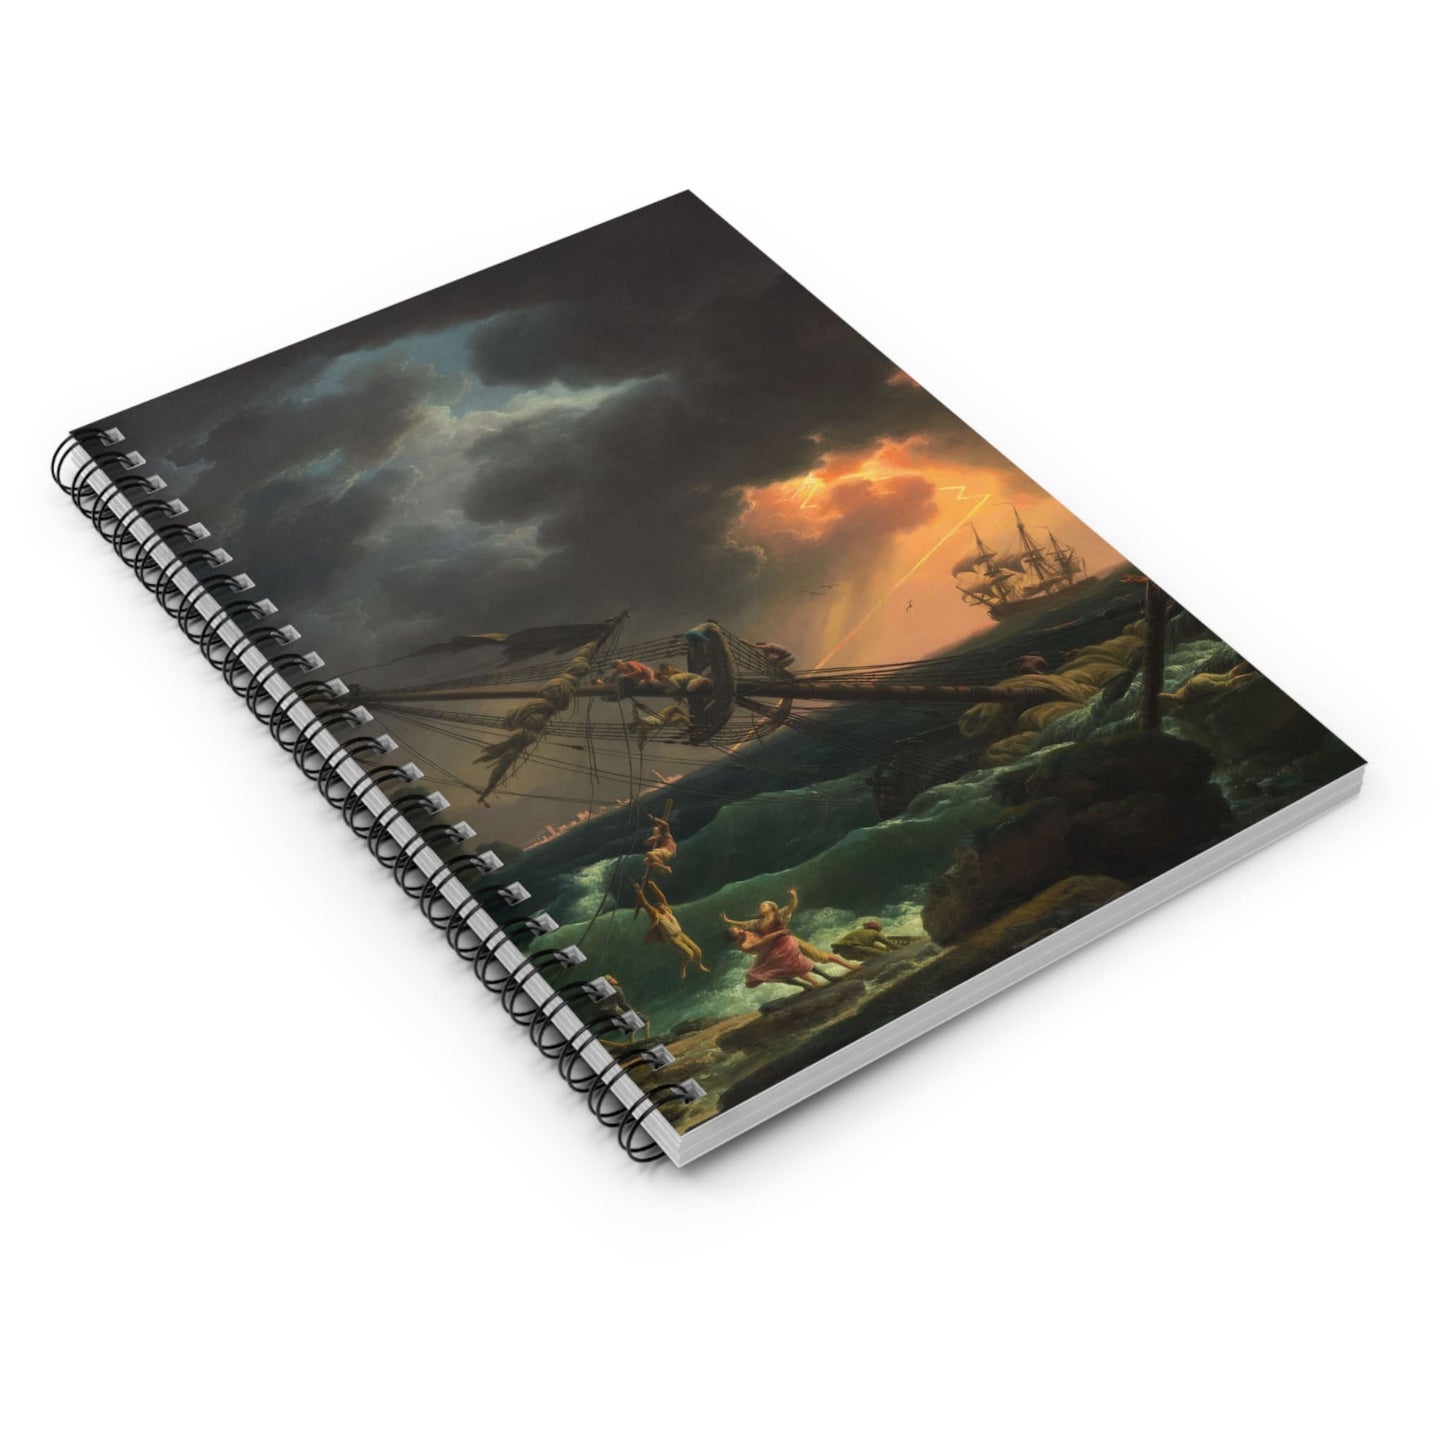 Antique Sea Painting Spiral Notebook Laying Flat on White Surface